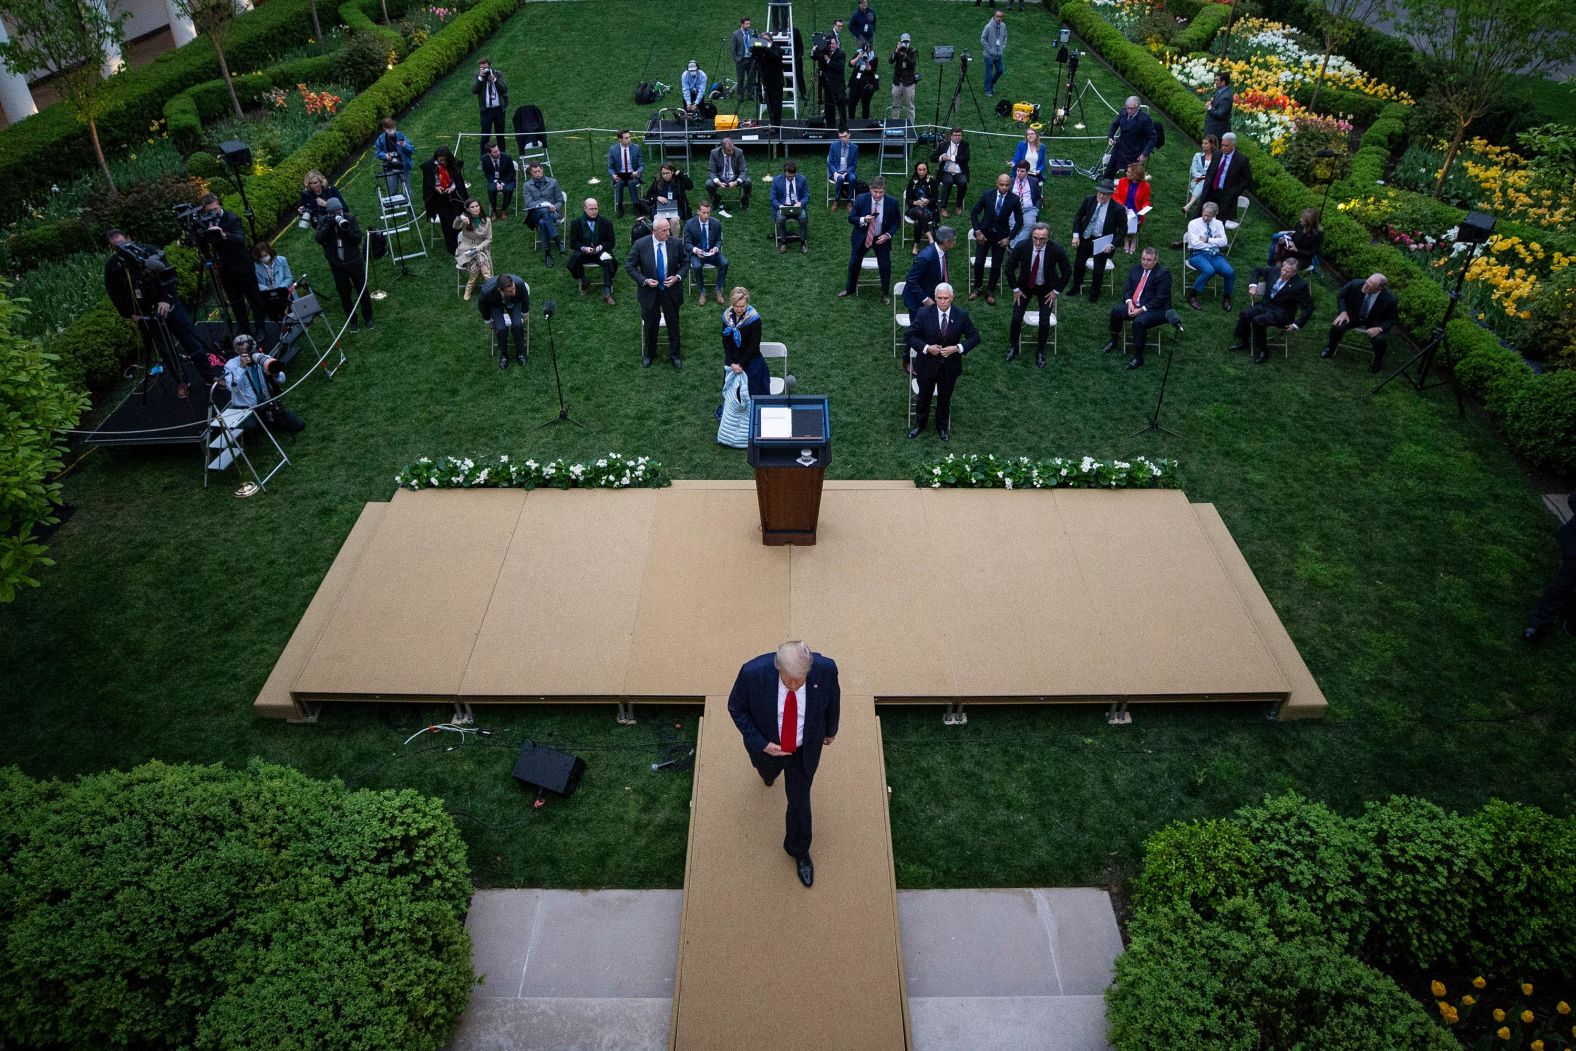 Trump leaves the White House Rose Garden following a coronavirus briefing in April 2020. During the briefing, Trump threatened to leave after Playboy correspondent and CNN analyst Brian Karem attempted to ask a question about social distancing. "Quiet. Quiet." Trump said. When Karem continued to ask his question Trump interjected, "If you keep talking, I'll leave and you can have it out with the rest of these people. If you keep talking, I'm going to leave and you can have it out with them. Just a loudmouth." It wasn't the first time Trump had lashed out at a reporter during a coronavirus briefing. <a href="index.php?page=&url=http%3A%2F%2Fwww.cnn.com%2F2020%2F04%2F08%2Fpolitics%2Fgallery%2Ftrump-white-house-coronavirus-briefings%2Findex.html" target="_blank">He has vented his frustrations</a> on several occasions.